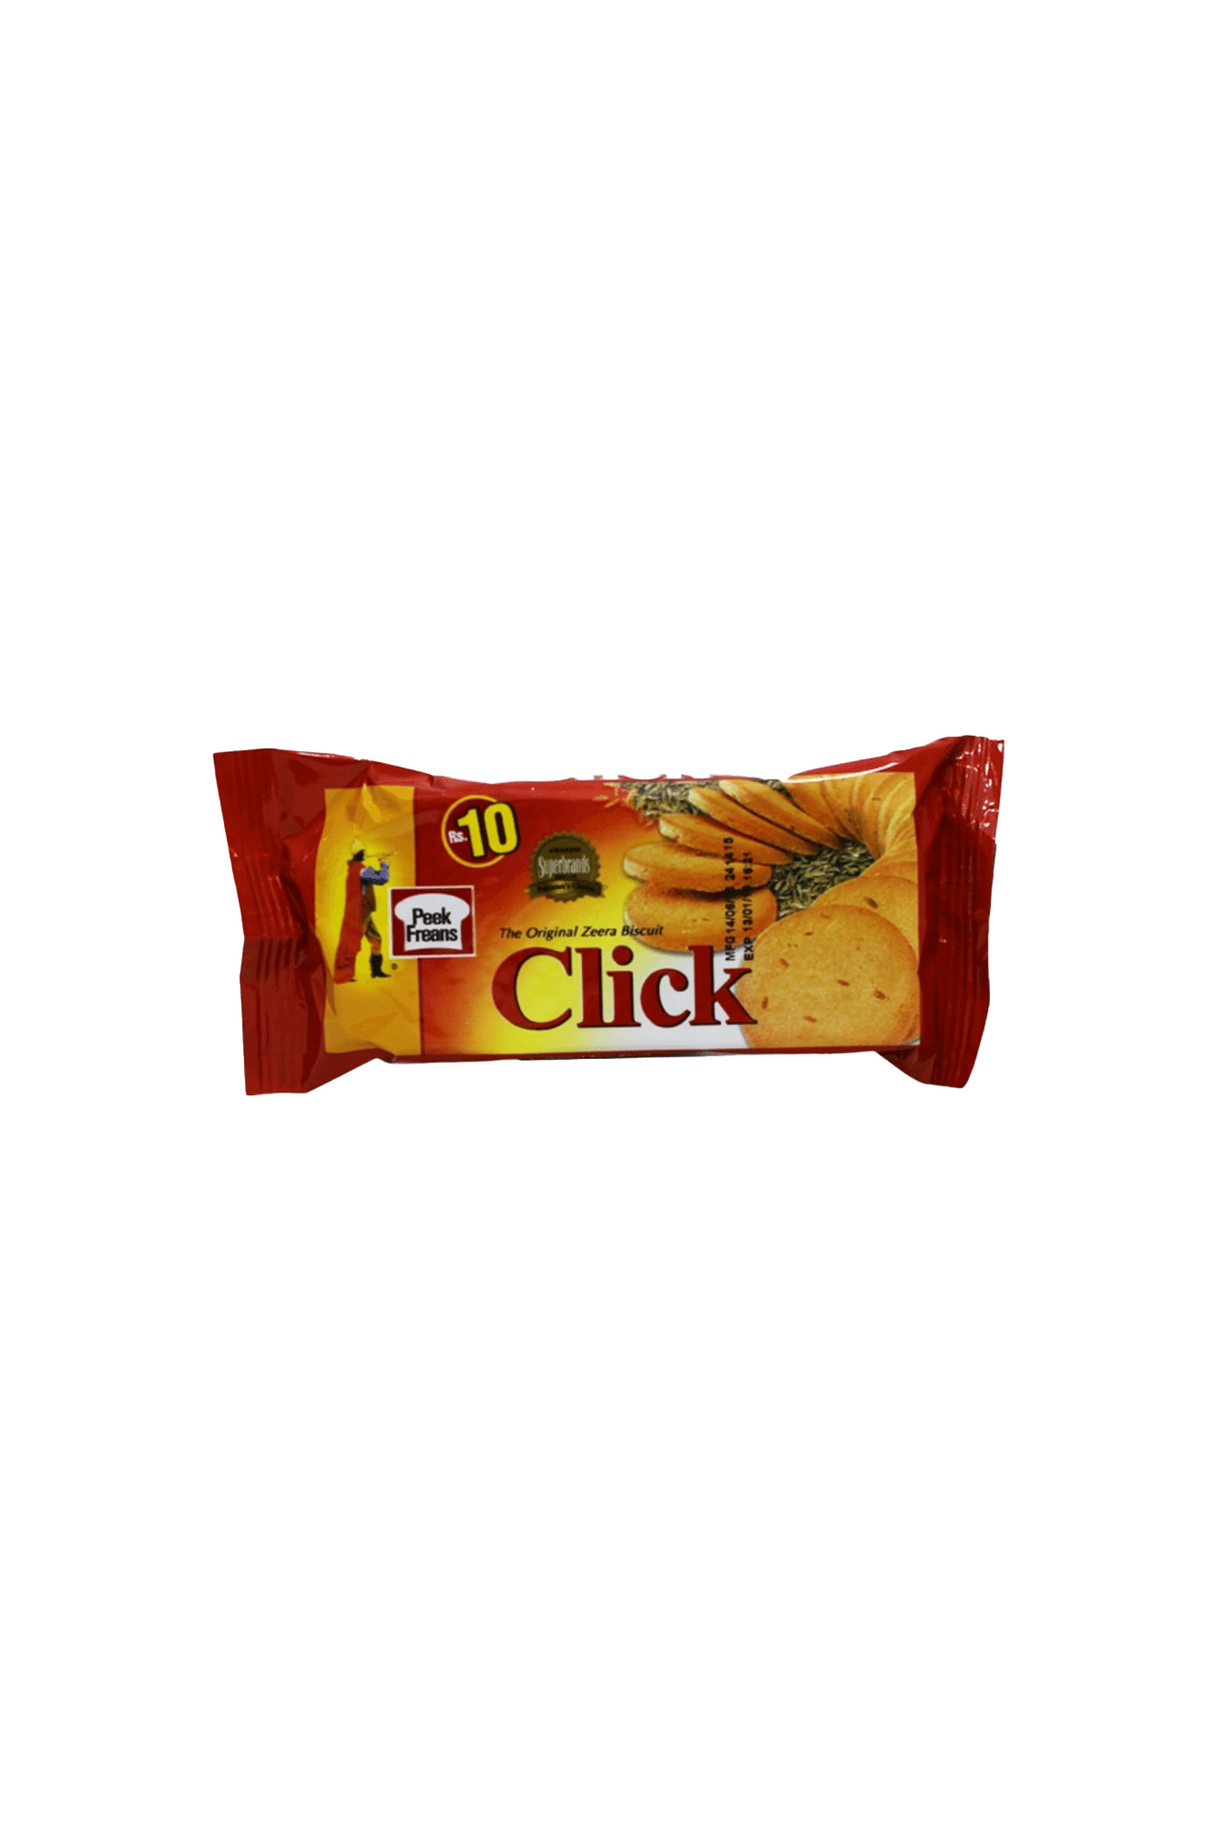 peek freans biscuits click 10rs